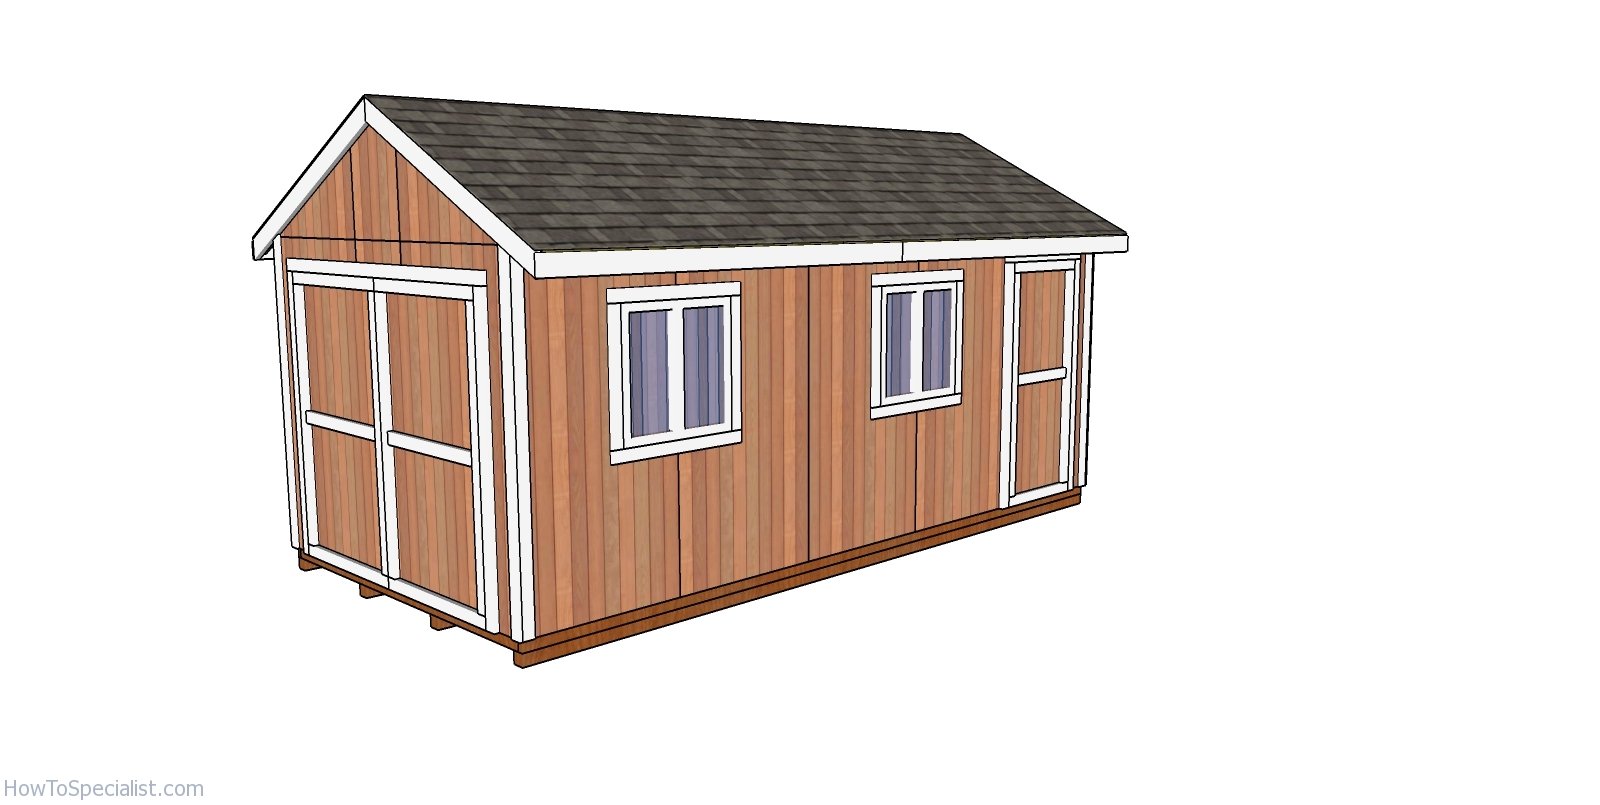 10x20 Gable Shed Plans Free - PDF Download | HowToSpecialist - How to Build, Step by Step DIY Plans